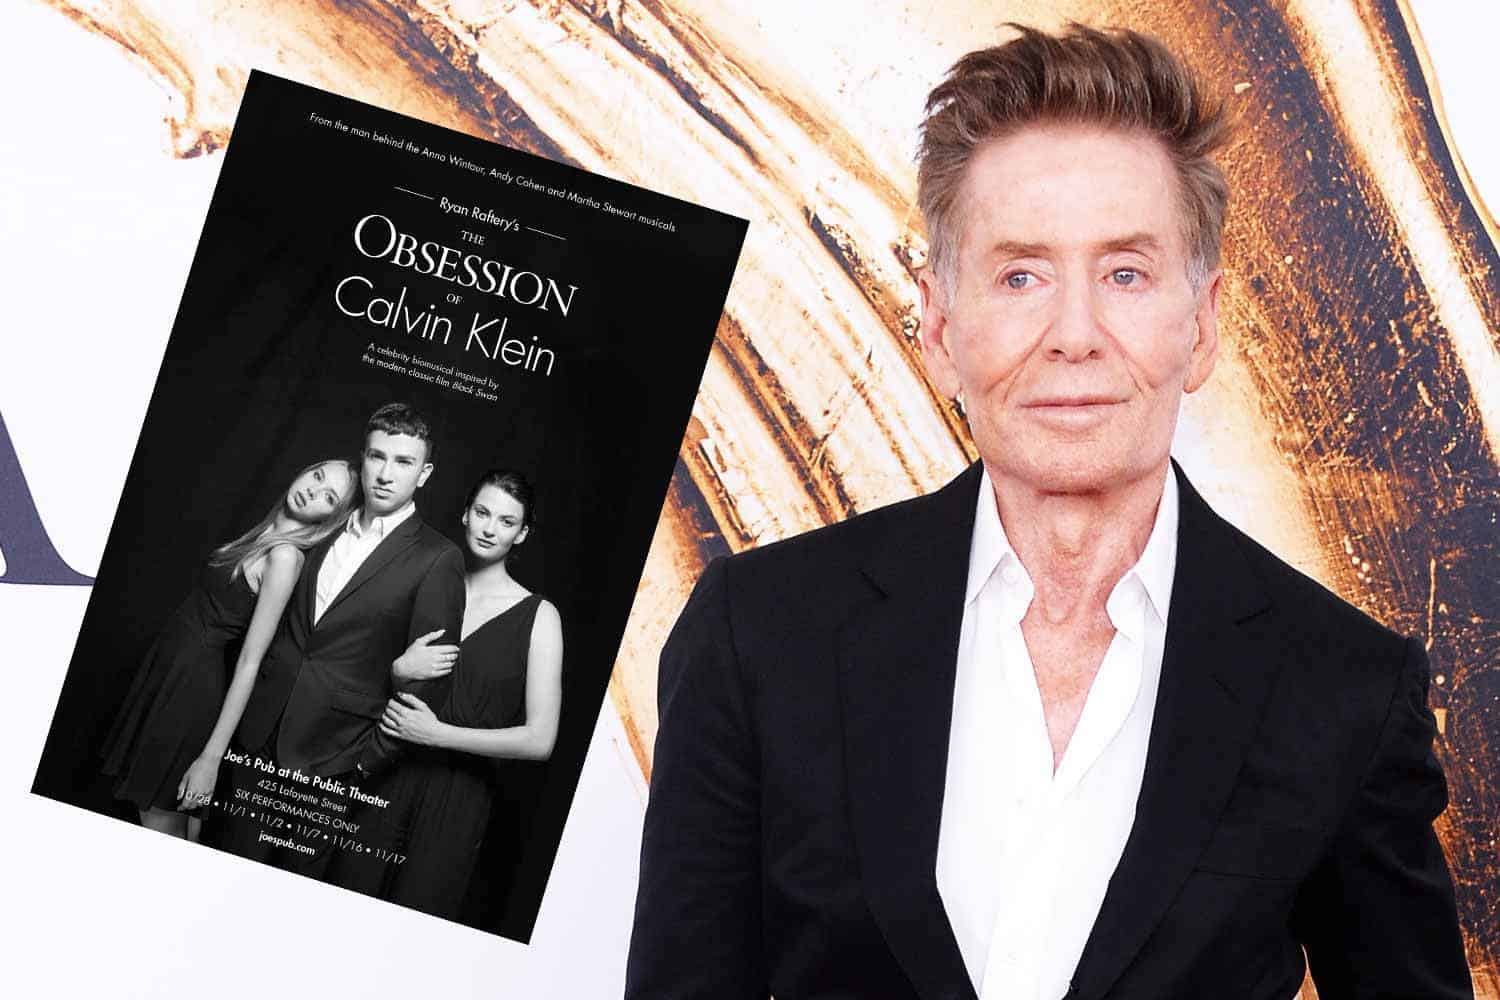 Calvin Klein's Former Assistant Wrote a Musical About Him